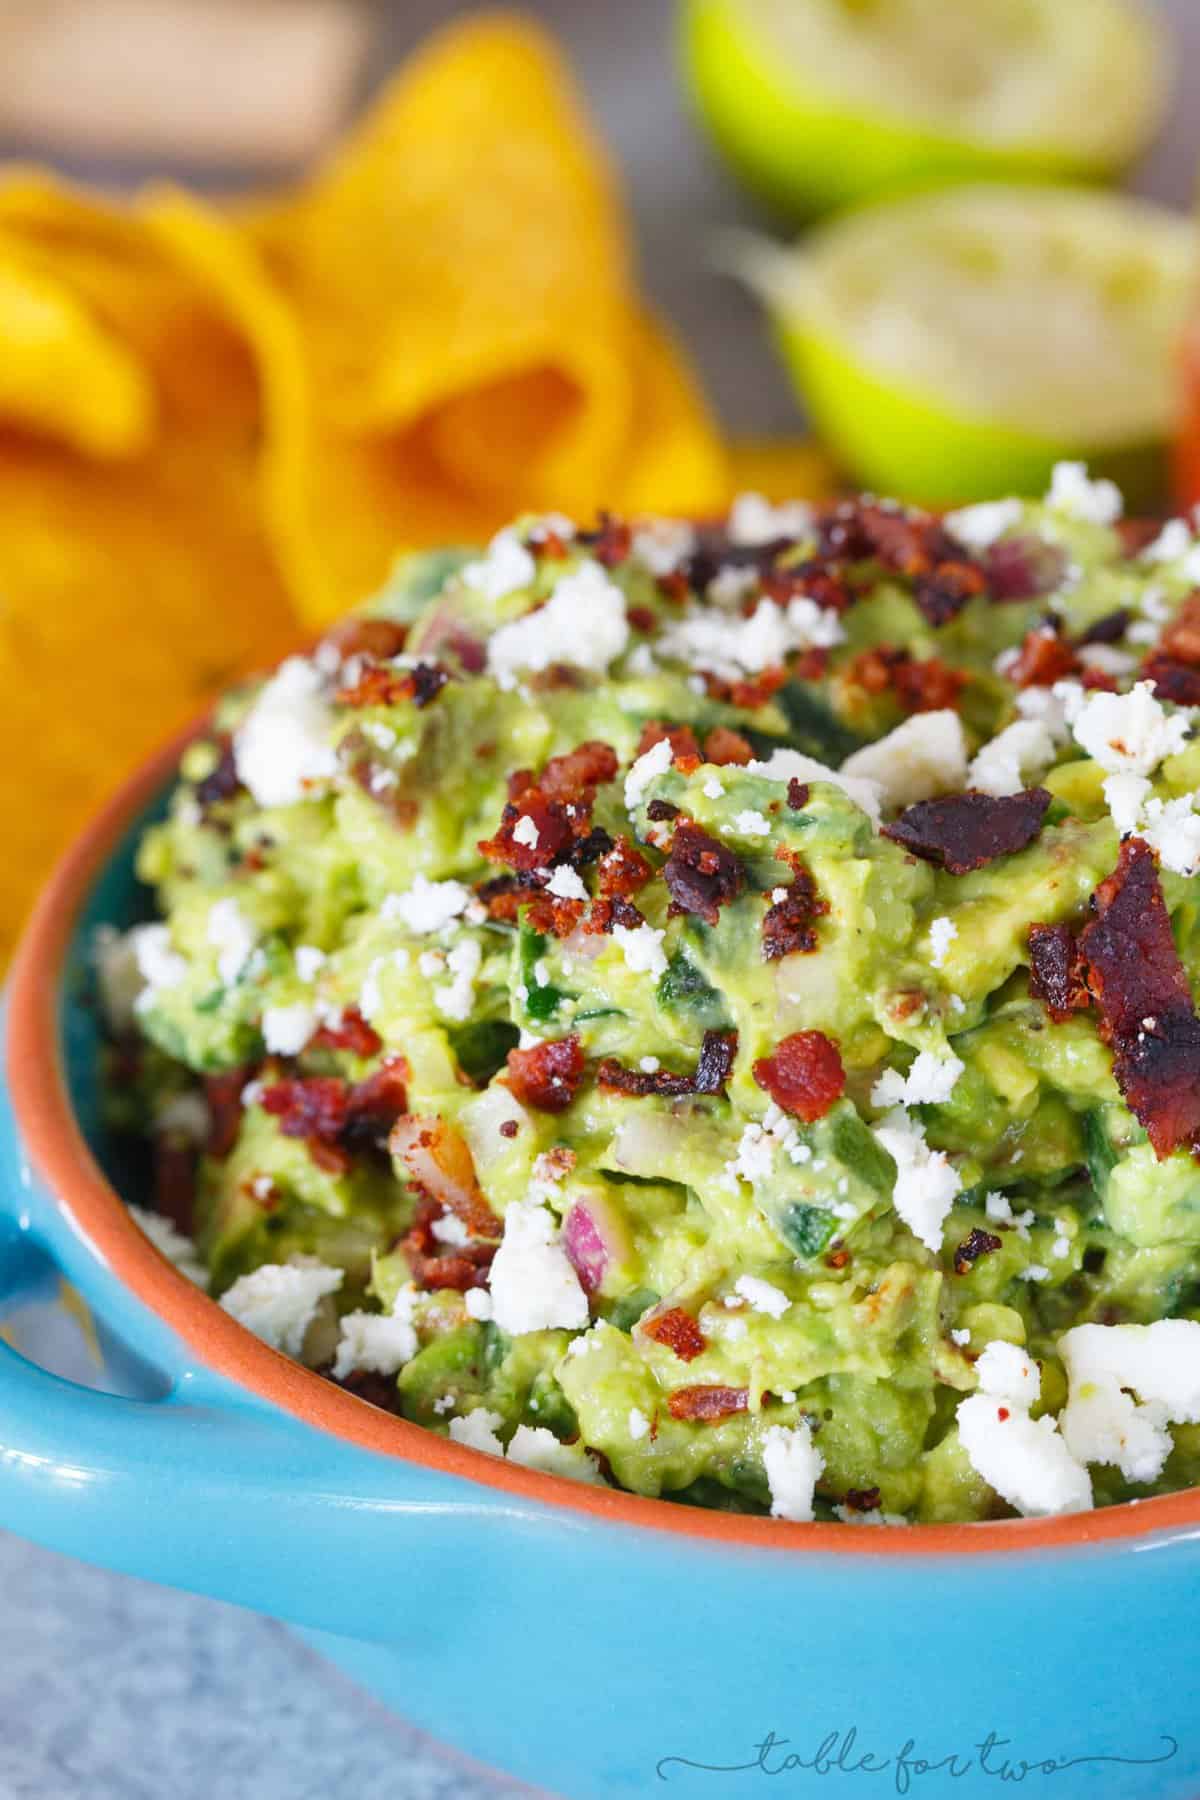 Loaded guacamole is pretty much the only way to have guacamole these days. Charred poblano peppers, bacon, and queso fresco make this guacamole freaking amazing especially with a glass of @sutterhome White Zinfandel! #ad #sweetonspice